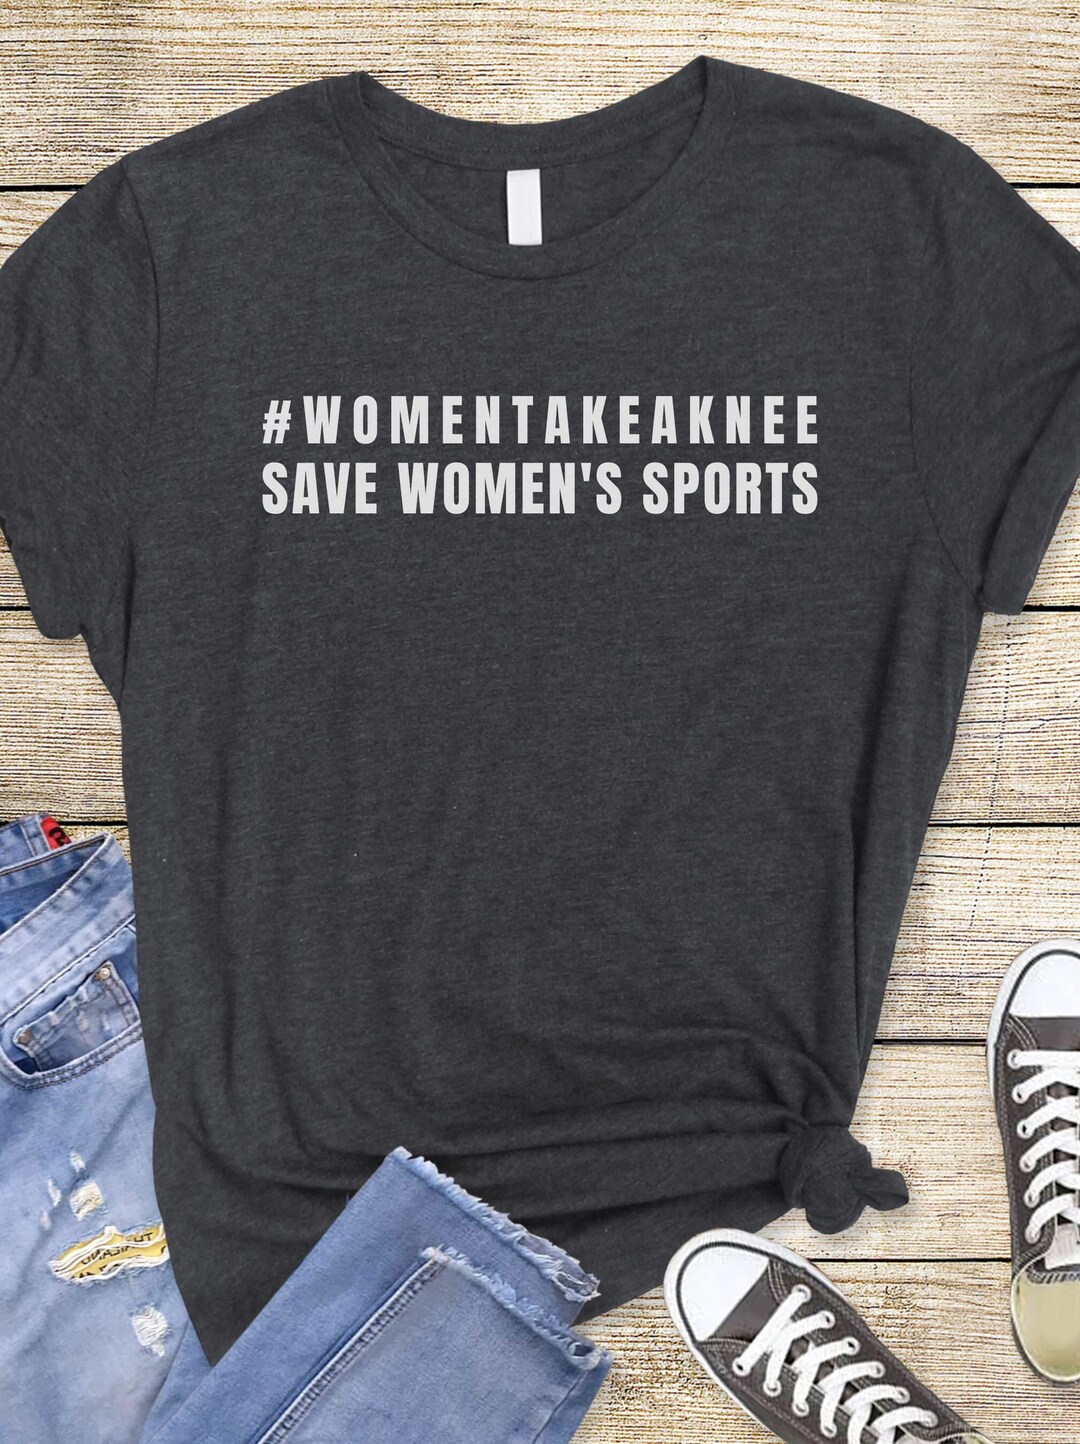 Take A Knee Shirt Save Womens Sports Protect Women Female Athletes ...